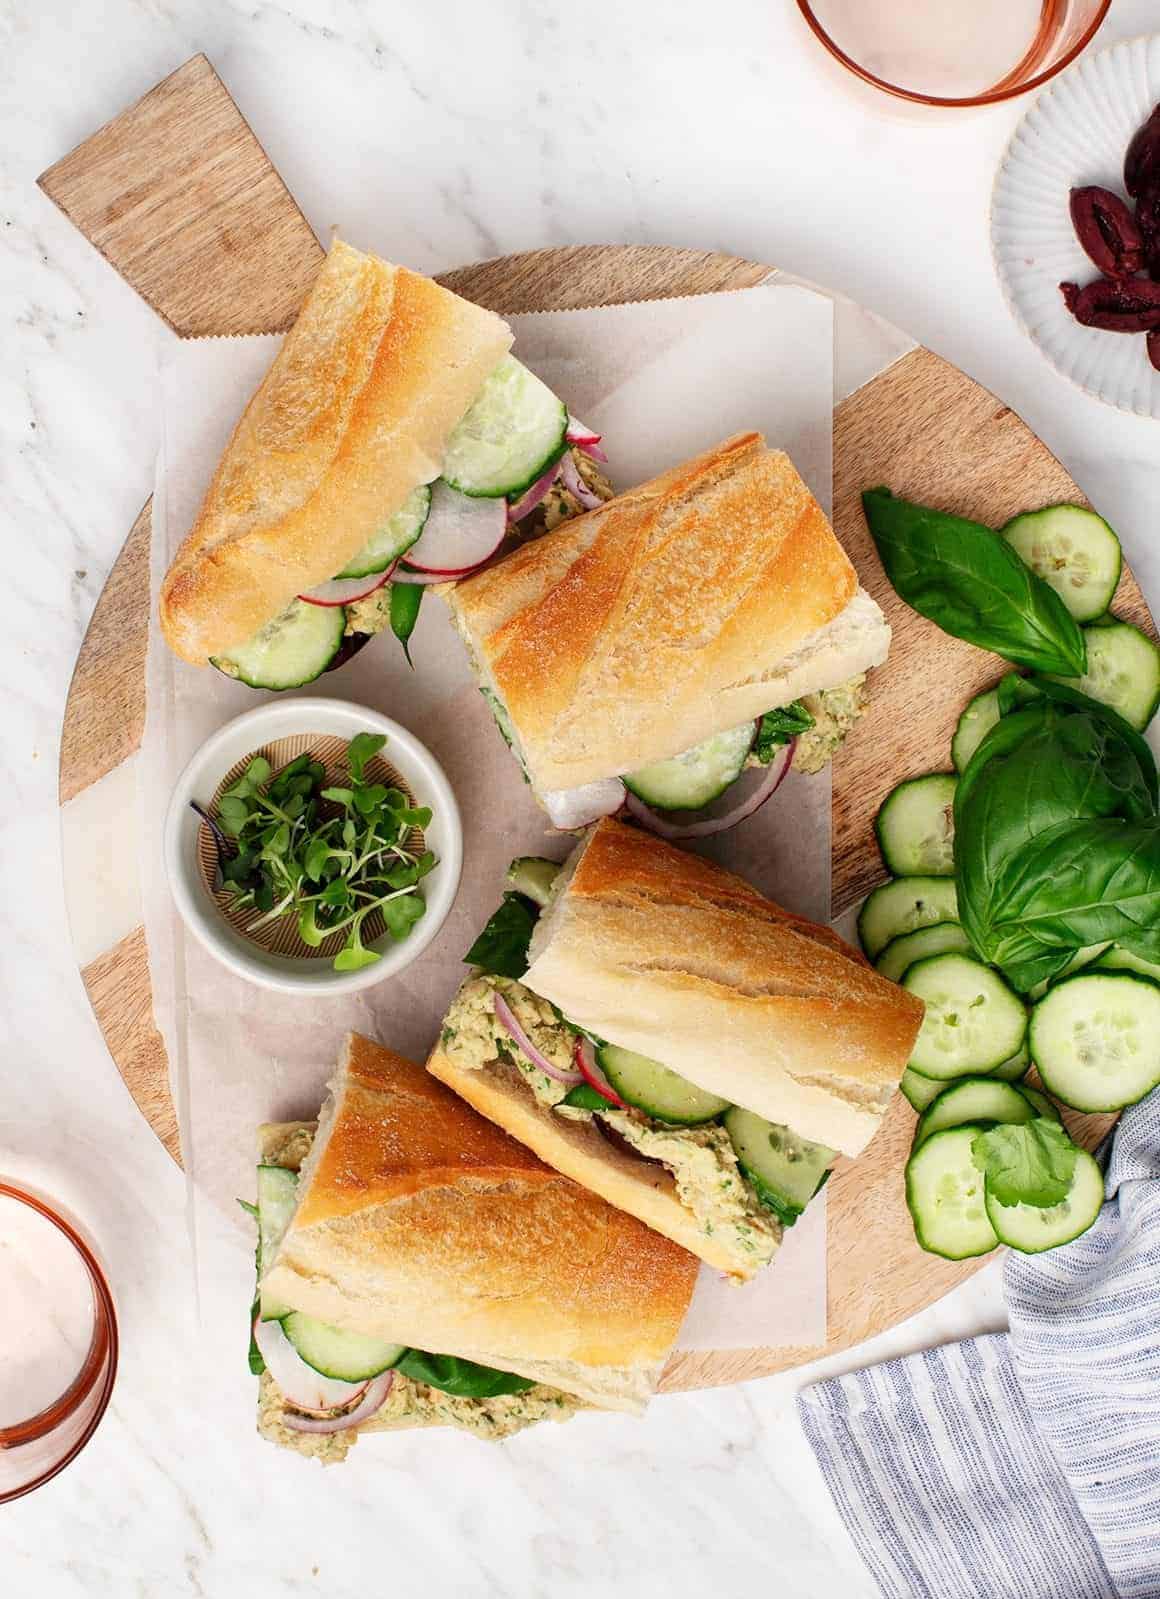 12 Vegan Sandwiches to Pack for Lunch - Love and Lemons